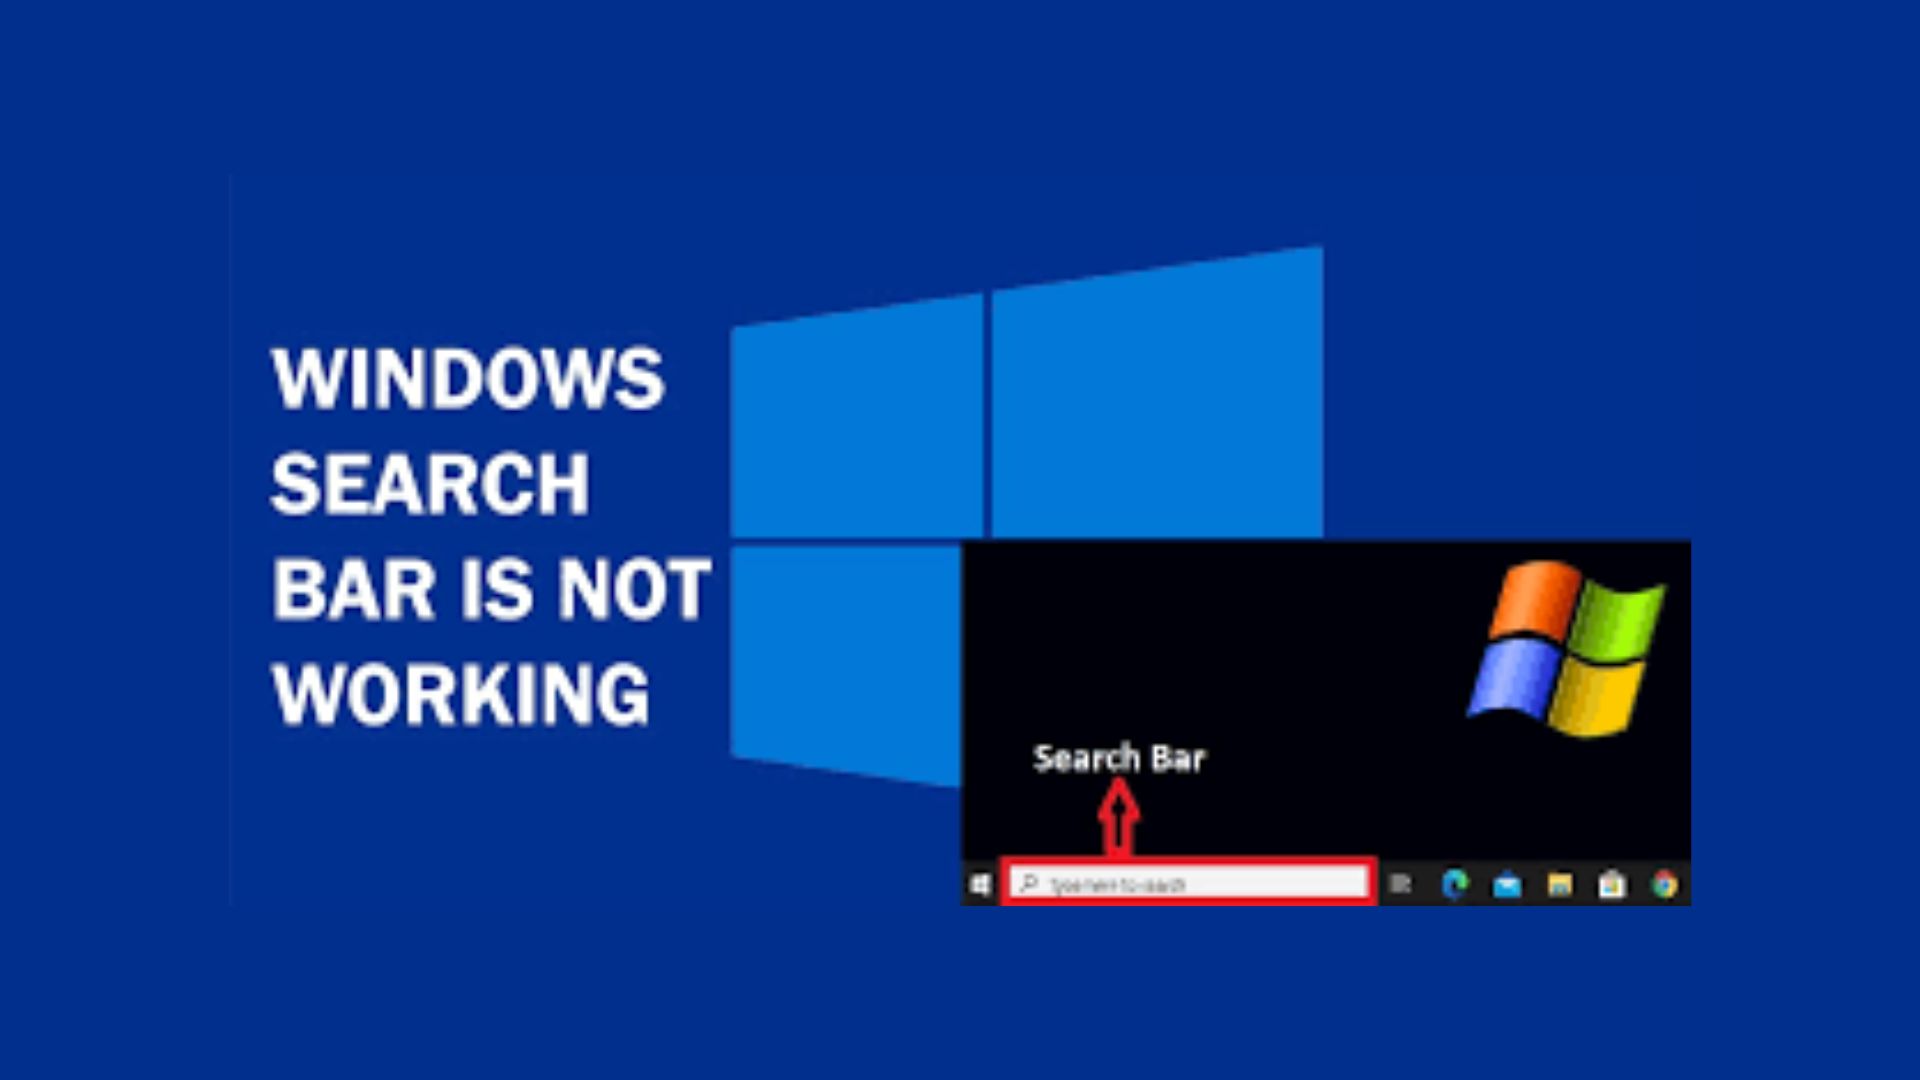 Windows Search Bar Not Working